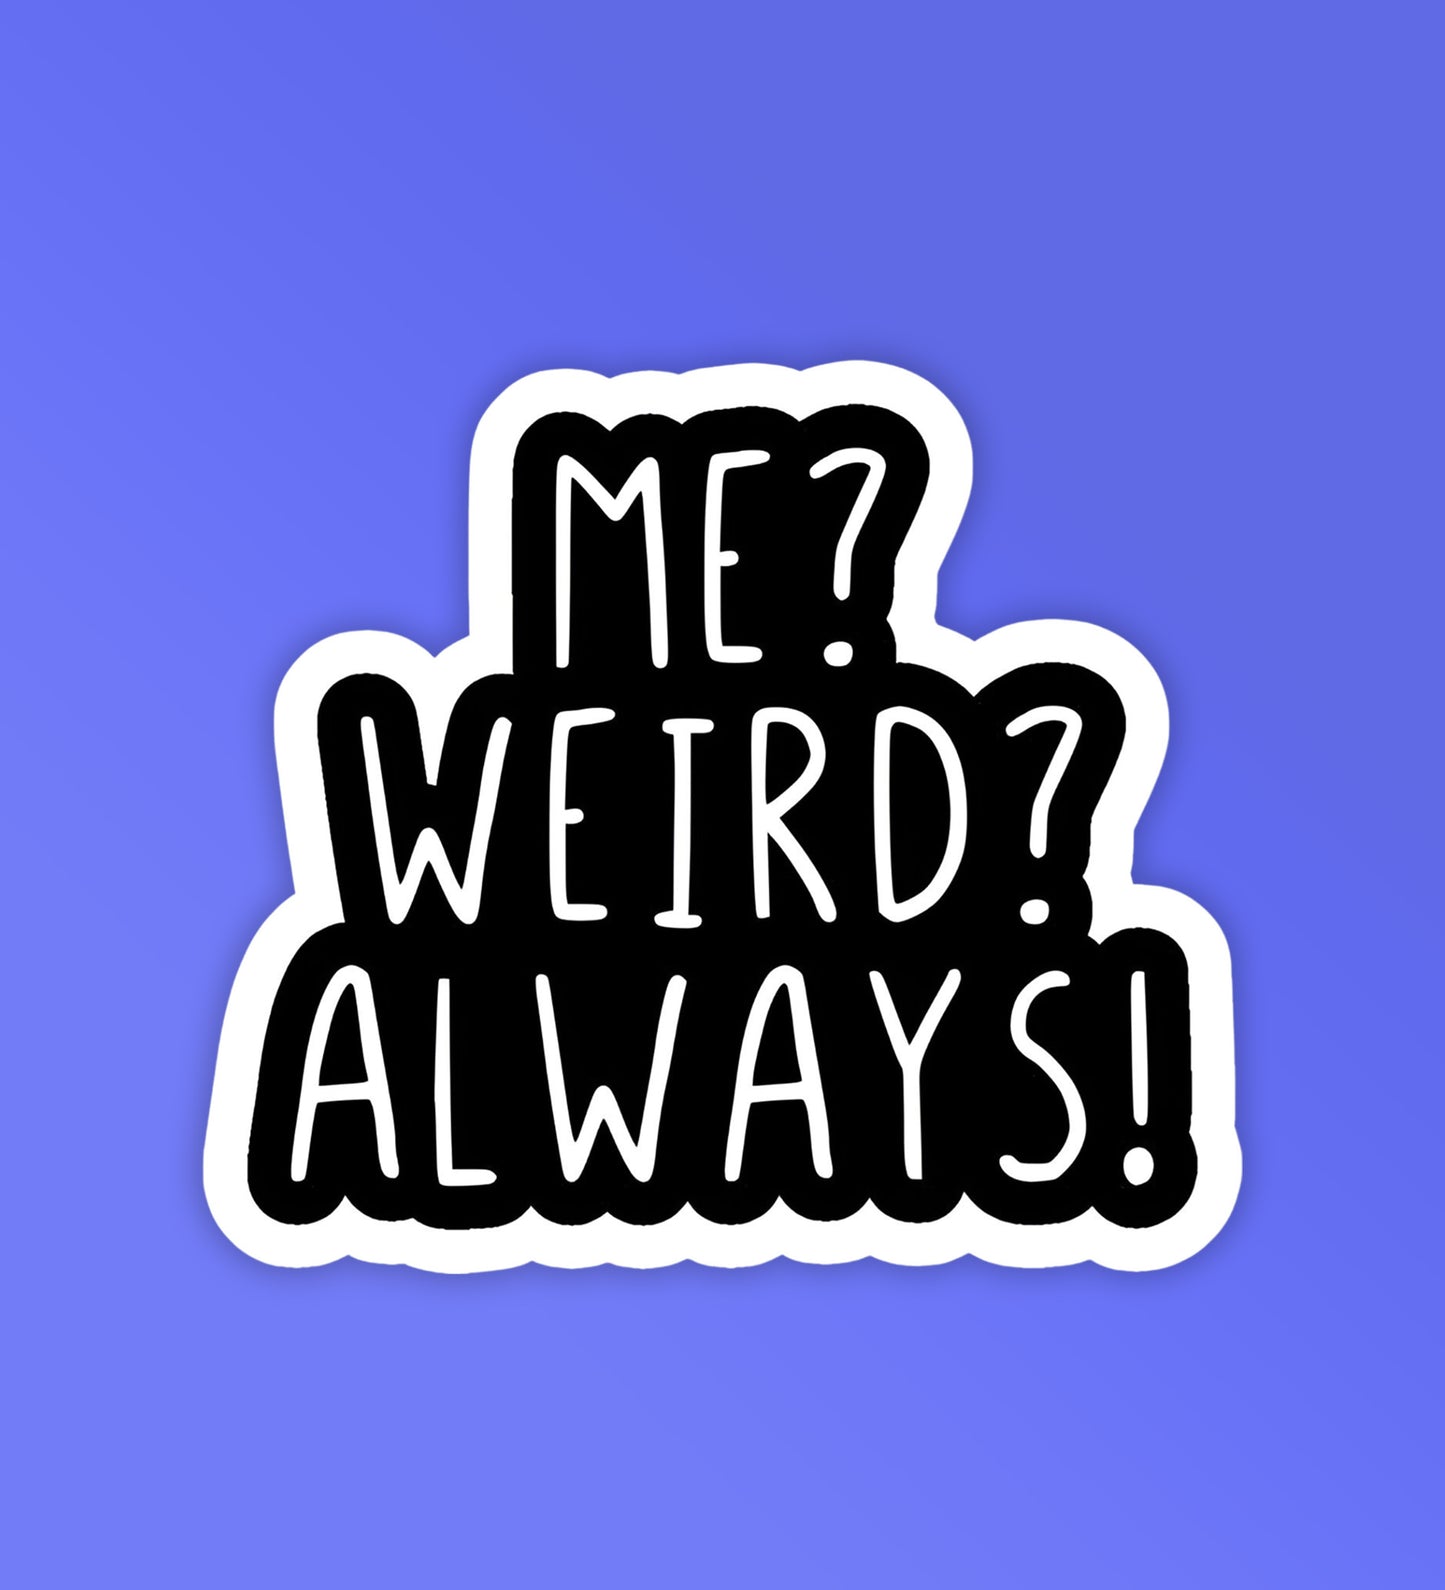 Me Weird? | Laptop & Mobile Stickers